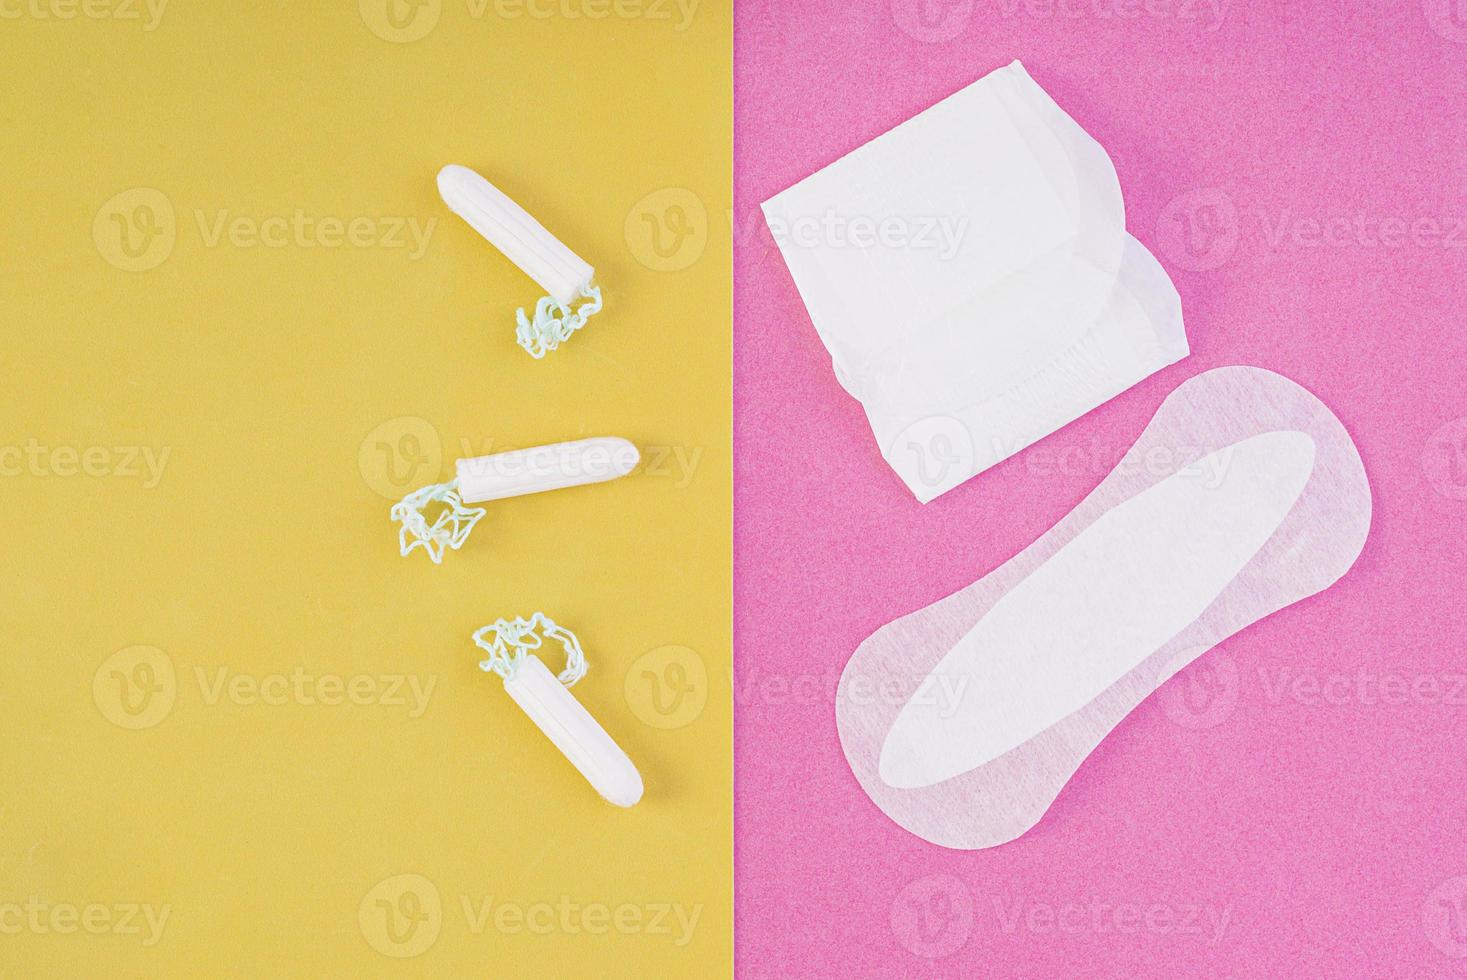 Hygiene care during critical days. Choosing between a tampon and a sanitary pad. Menstrual cycle. Hygiene products for women. Top view photo